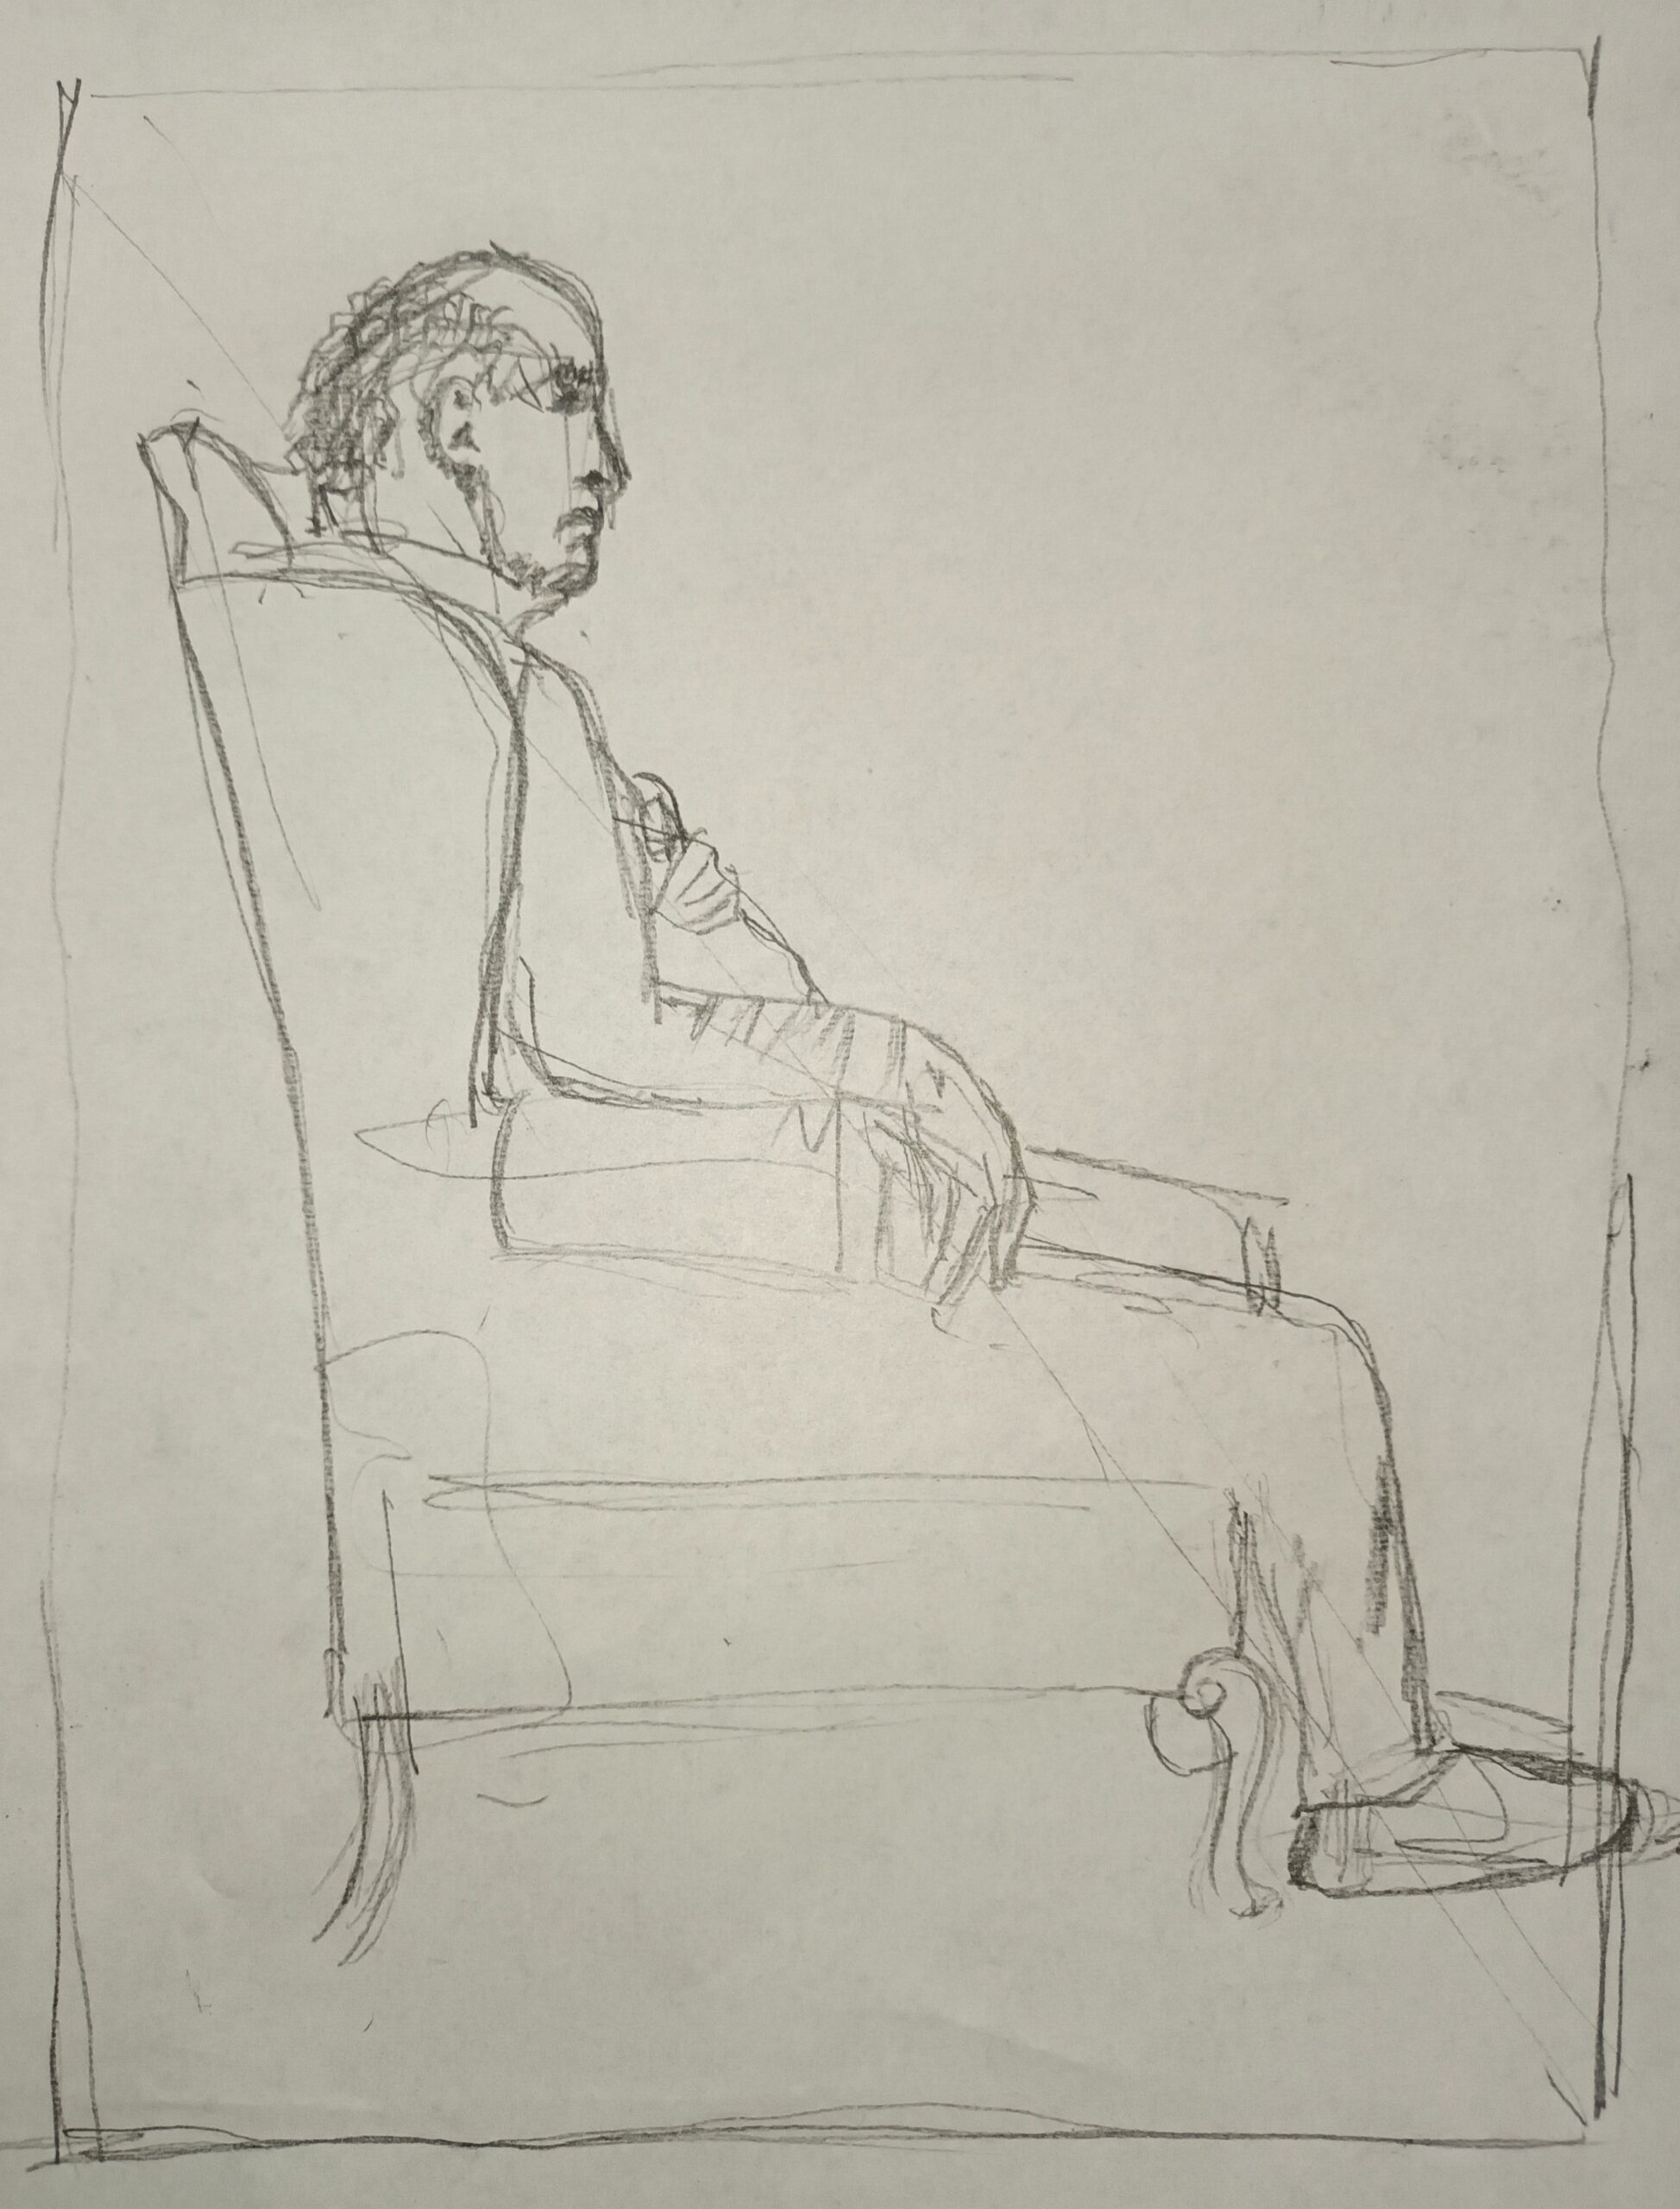 Stephen in armchair drawing the word